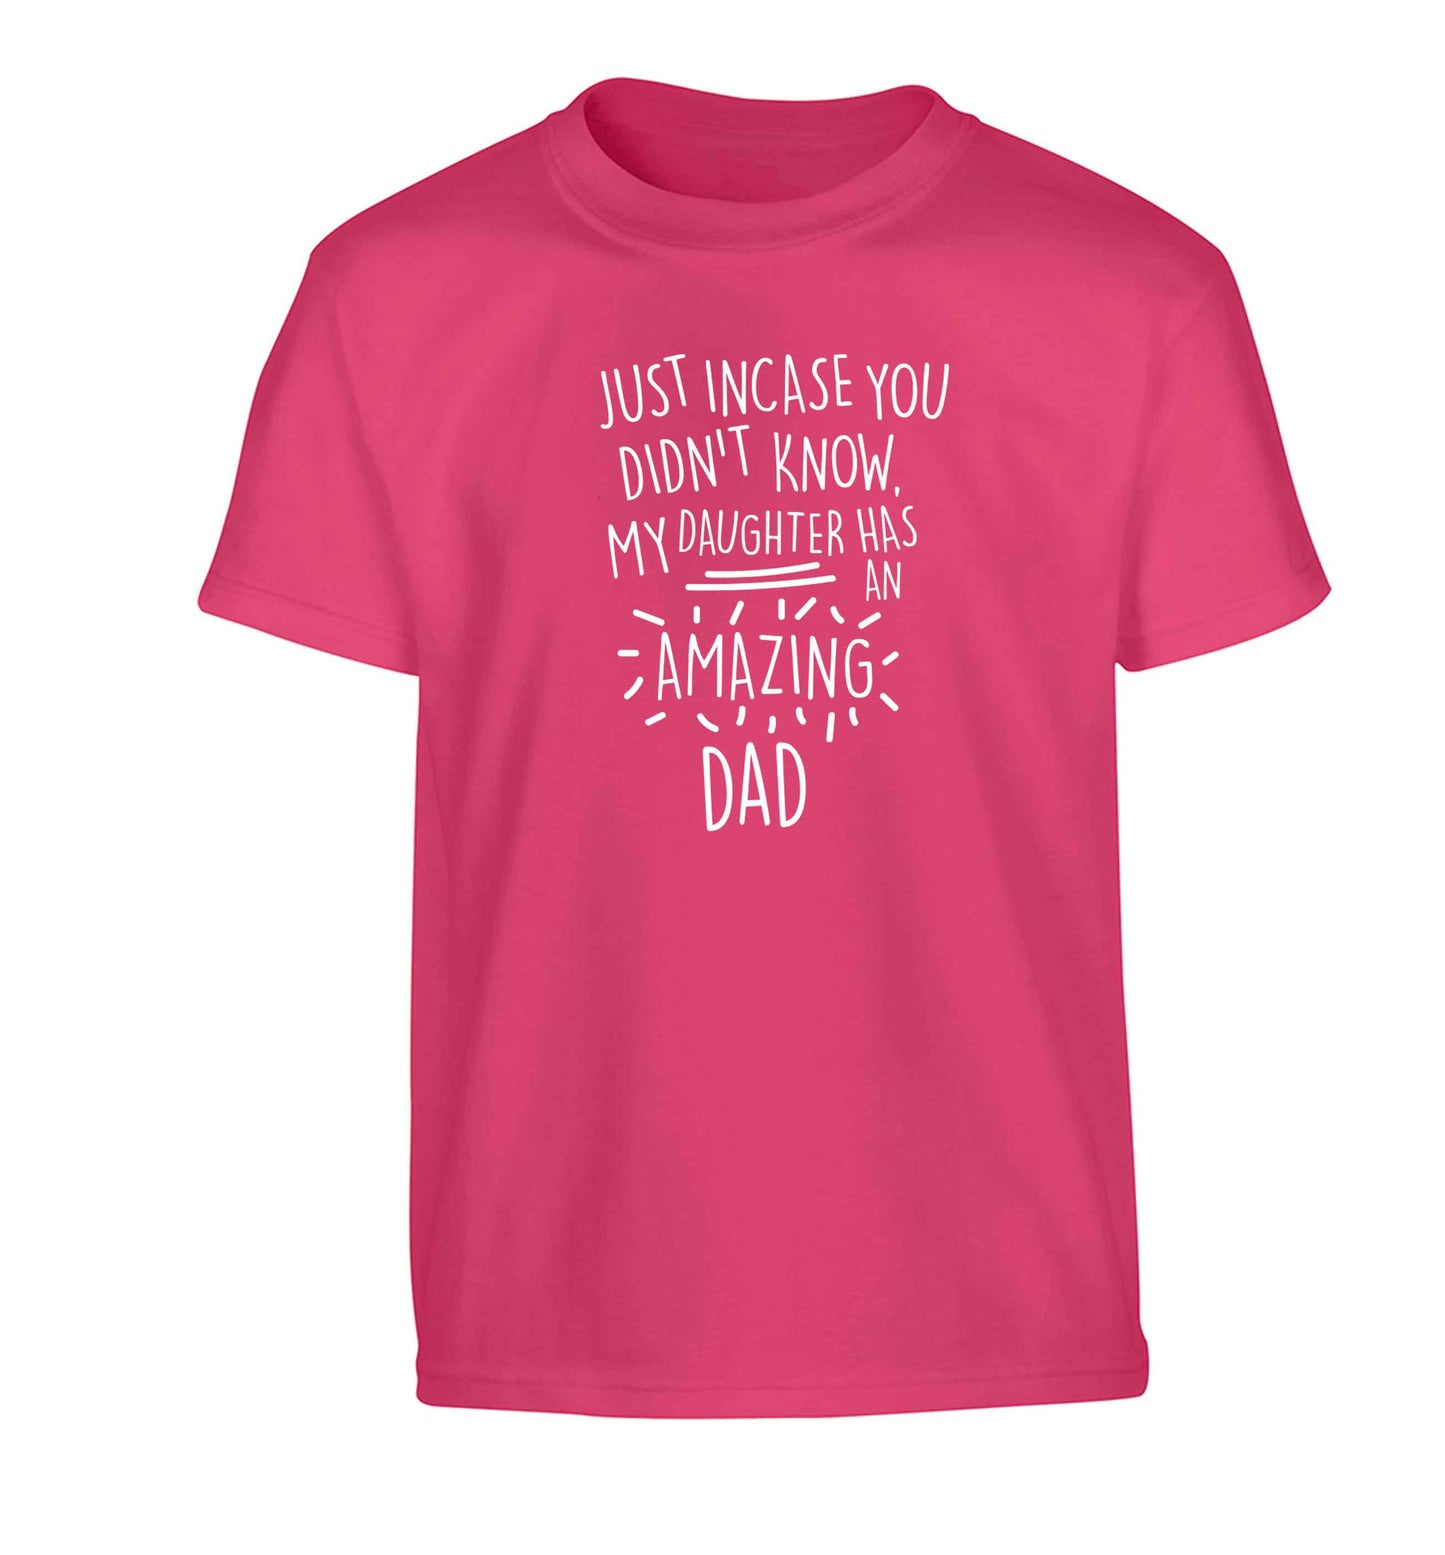 Just incase you didn't know my daughter has an amazing dad Children's pink Tshirt 12-13 Years